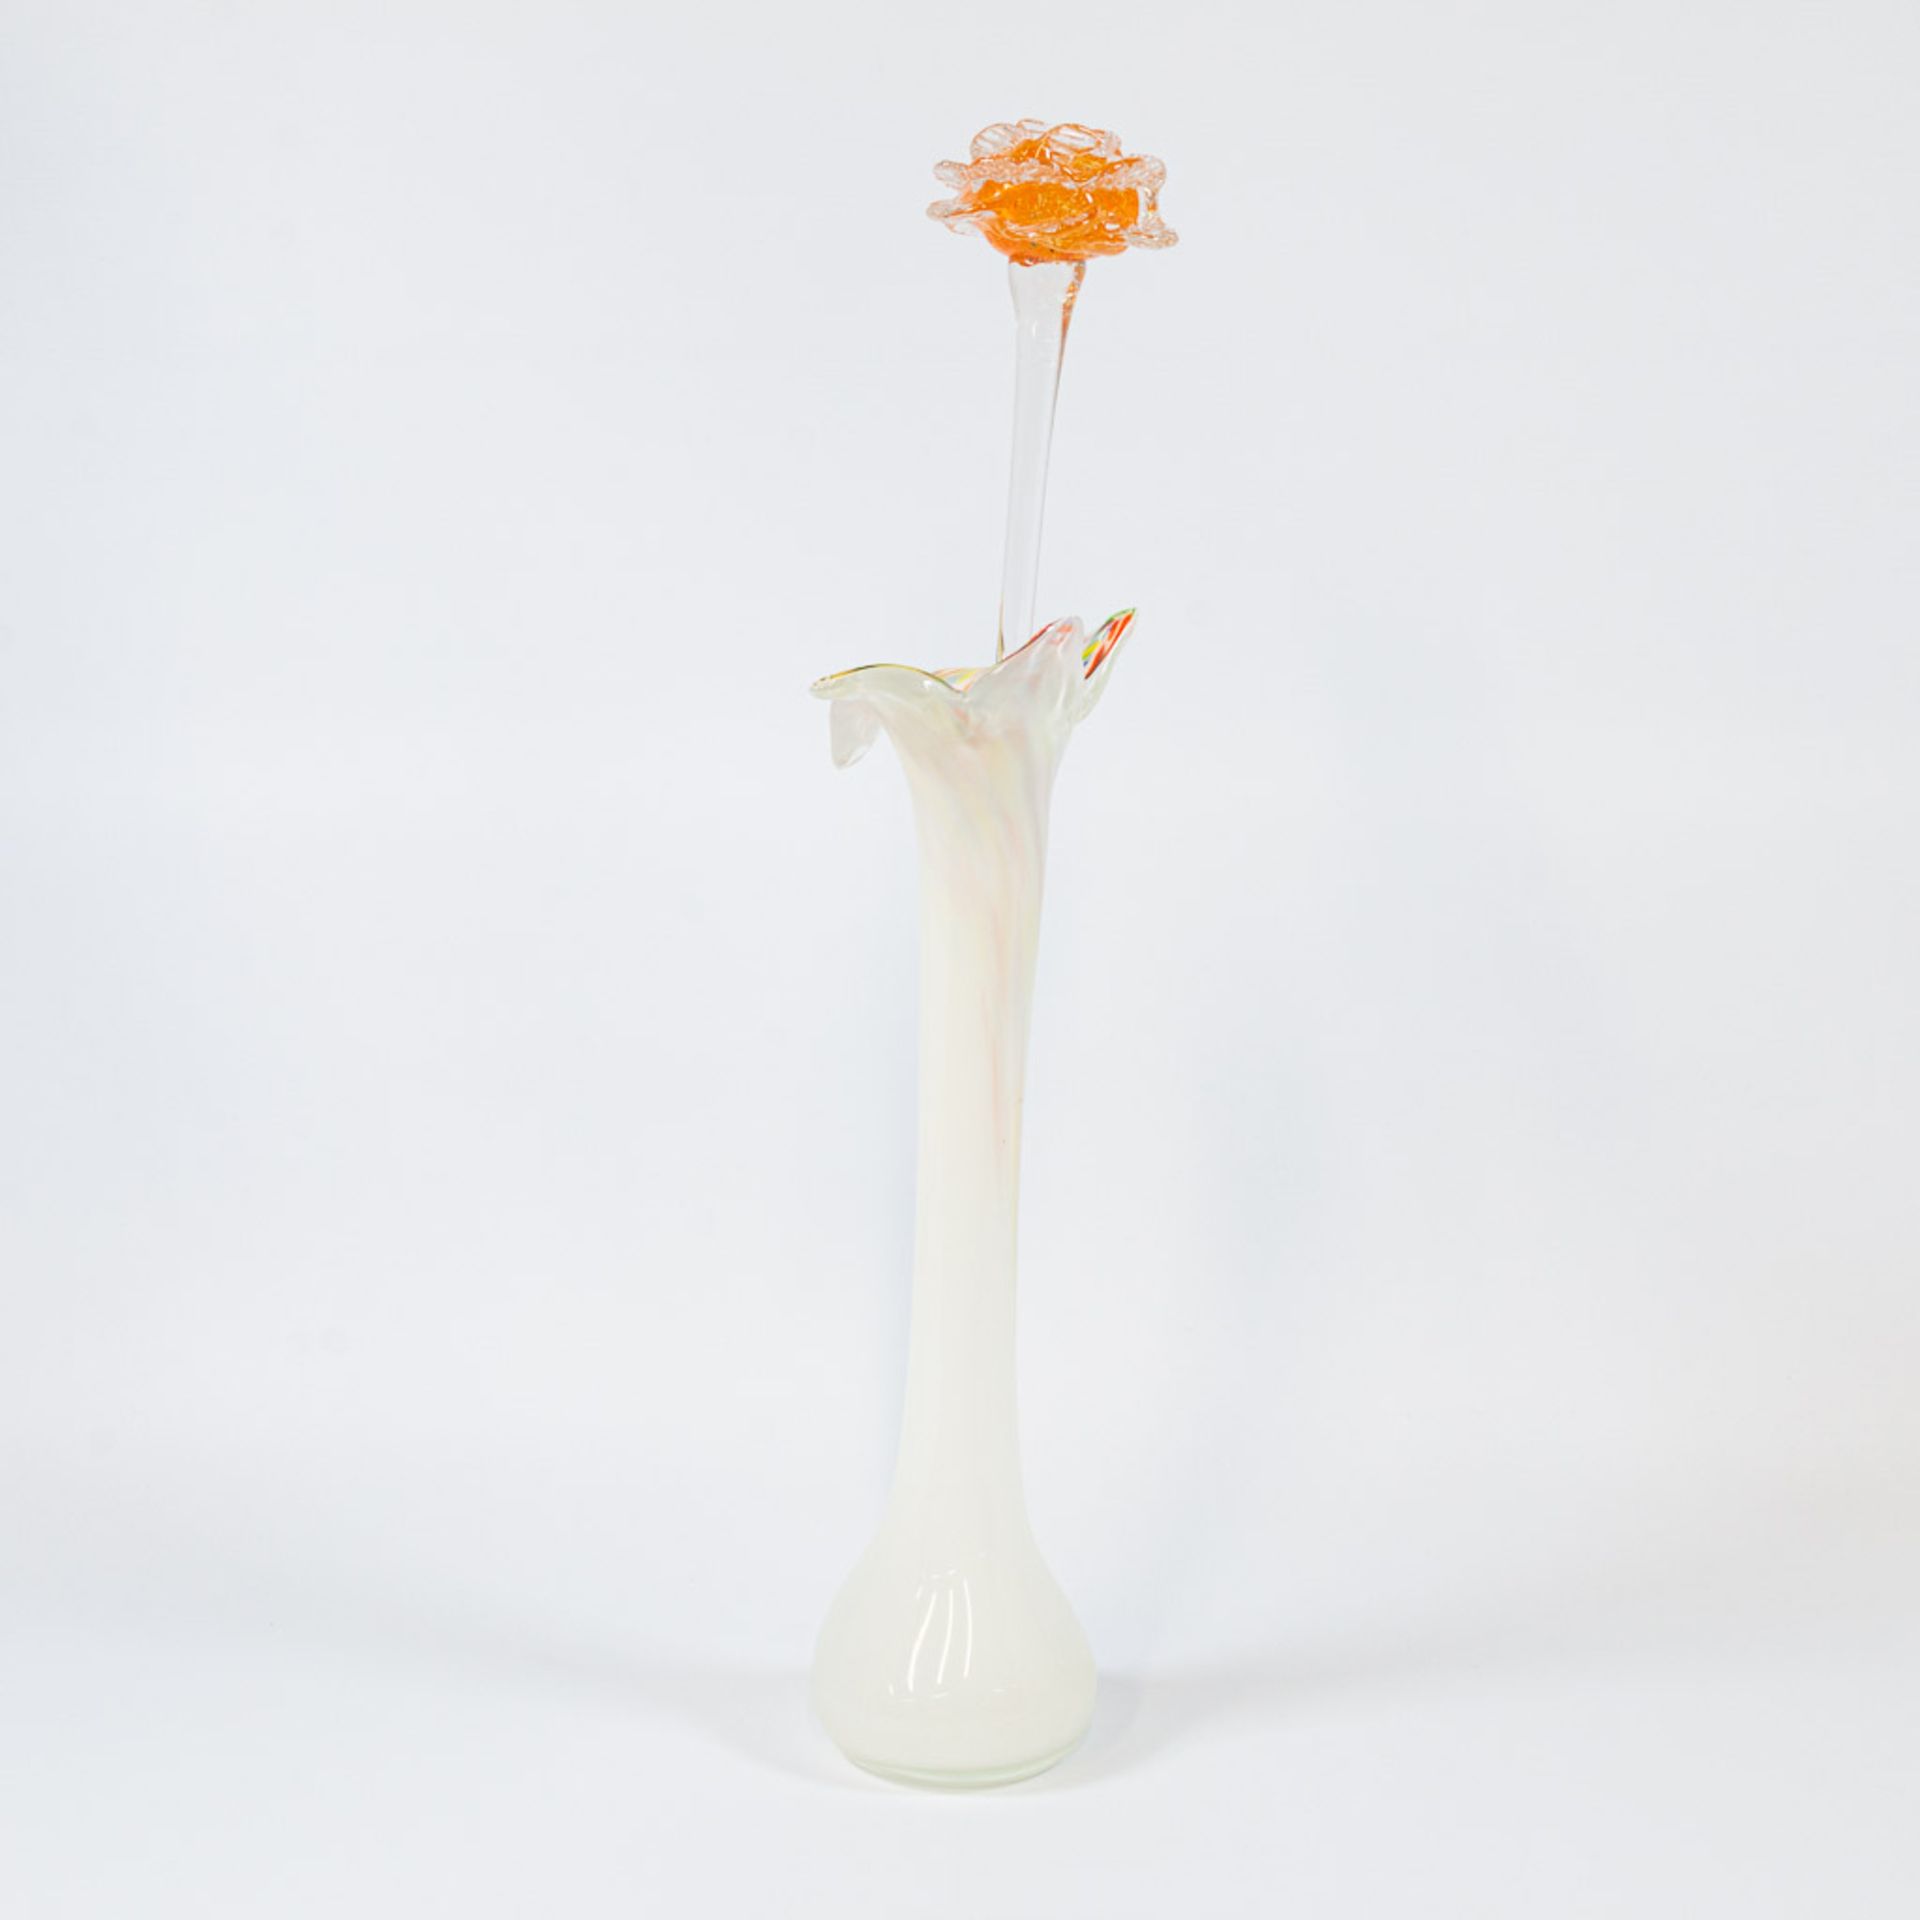 A collection of 4 vases and 4 glass flowers made in Murano, Italy. - Image 6 of 49